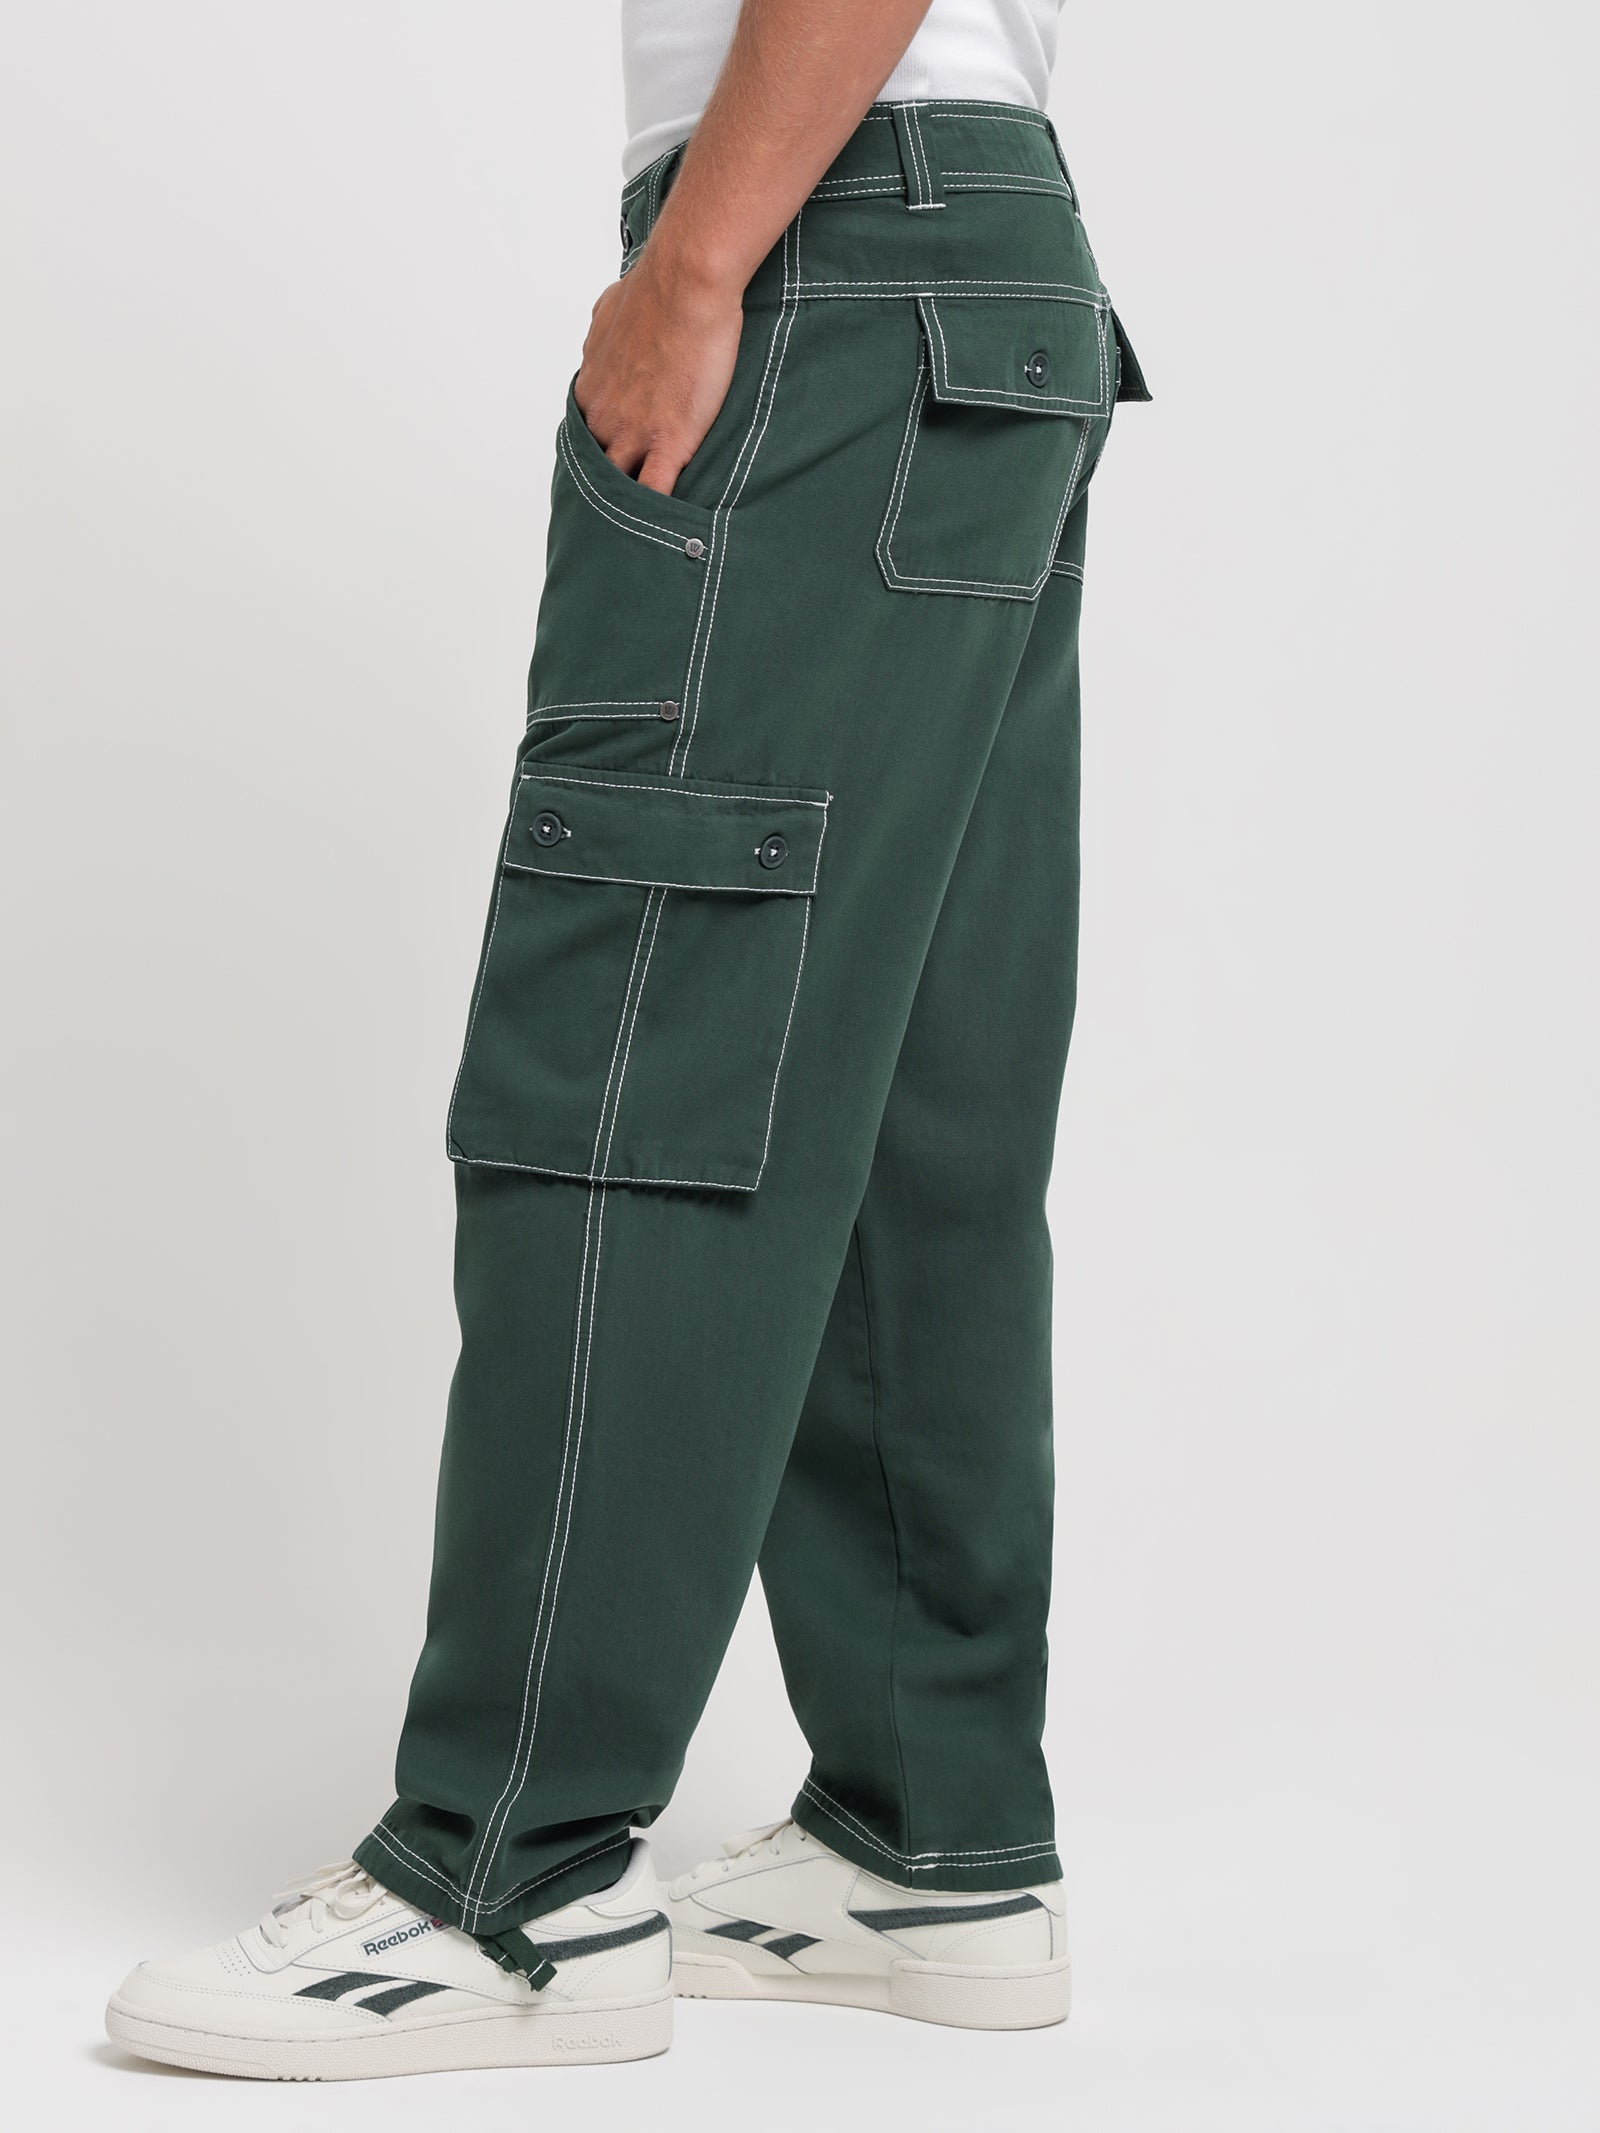 Syndicate Cargo Pants in Forest Green